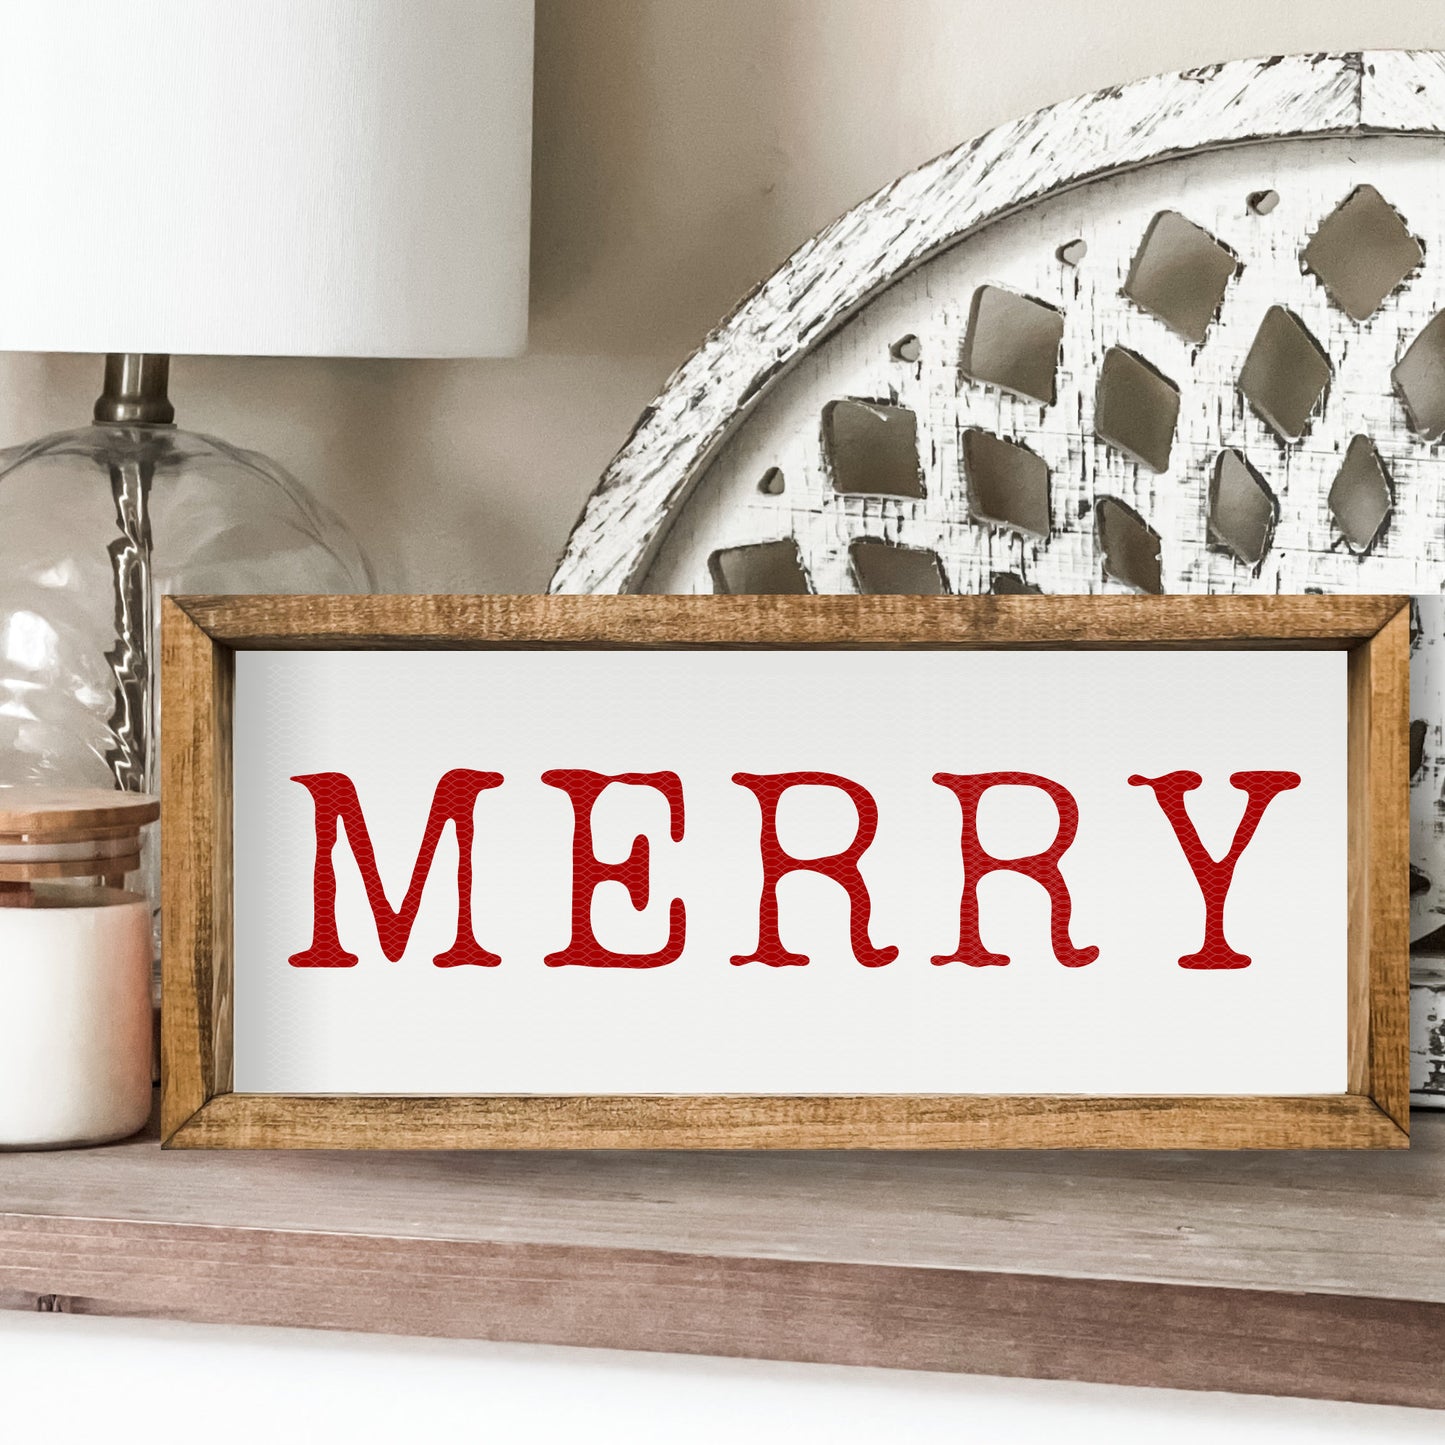 Merry Sign. Hang this Christmas sign on your wall or stand it on an entryway table!